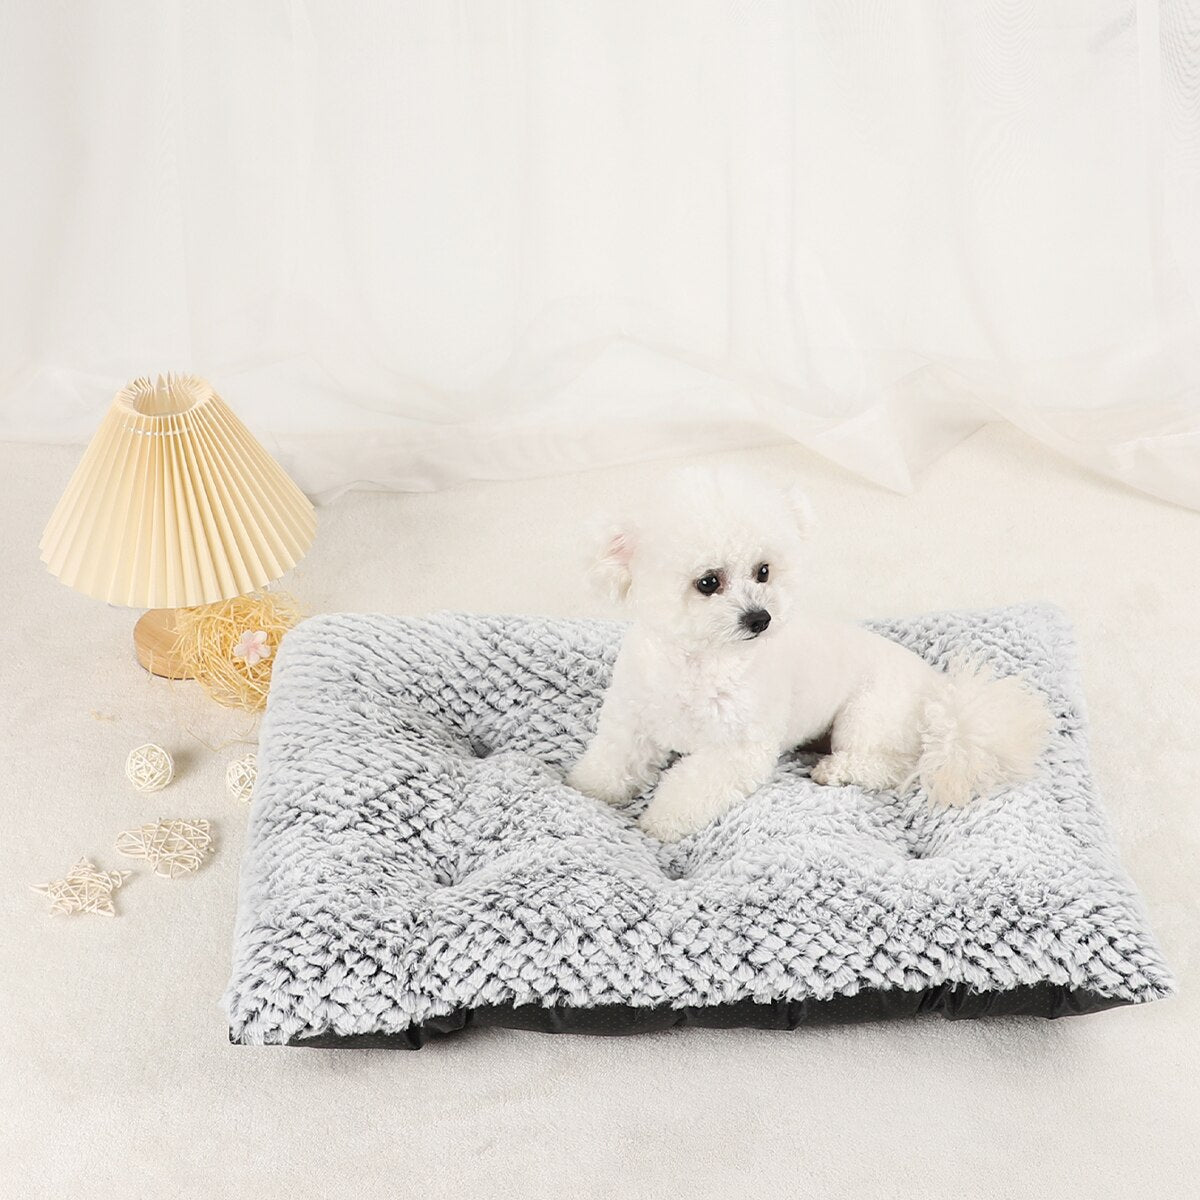 Dog Mat Pet Bed Kennel Beds for Dogs Small Supplies Large Plush Washable Medium Basket Warm Accessories Accessory Fluffy Sofa